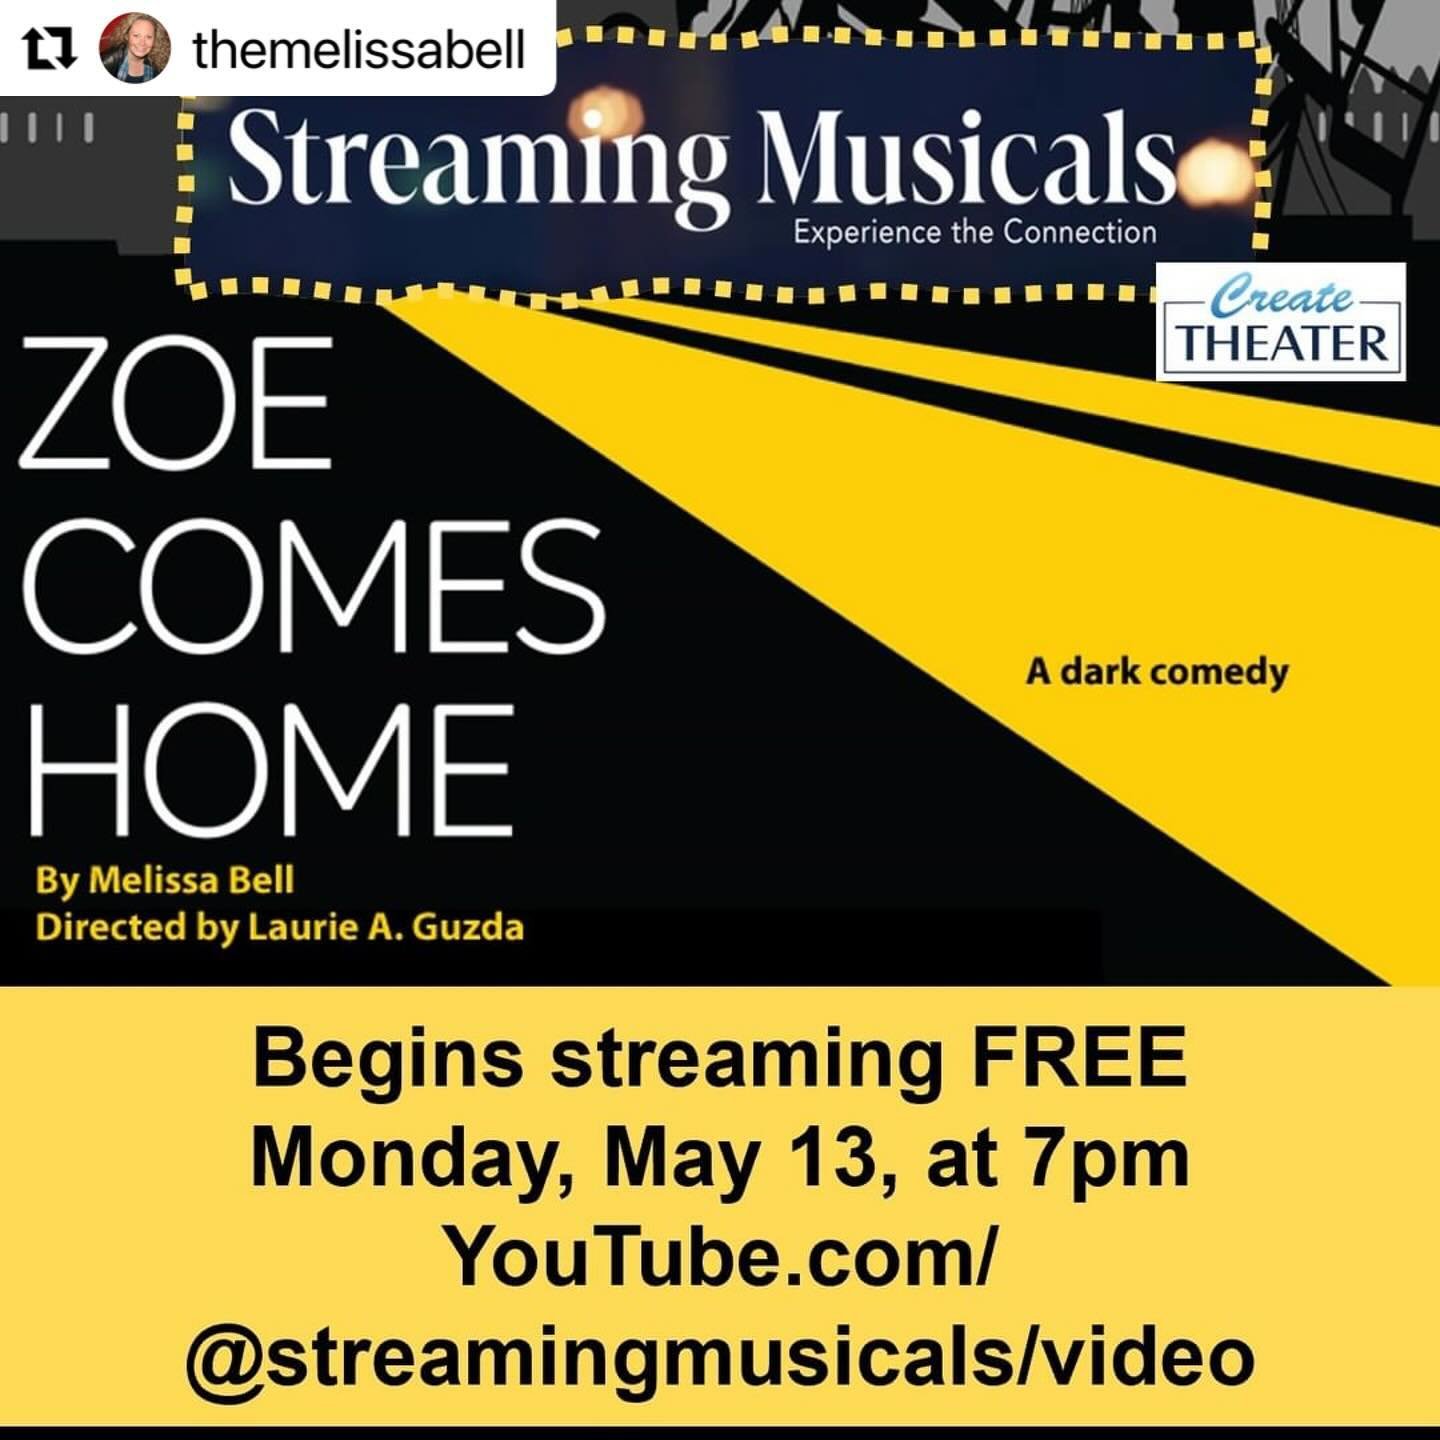 ⭐️Check out our awesome ensemble members Melissa Bell &amp; Jess Bev!⭐️
#Repost @themelissabell with @use.repost
・・・
I&rsquo;m thrilled to announce that ZOE COME HOME will premiere on
On Streaming Musicals / CreateTheater @createtheater Monday Night 